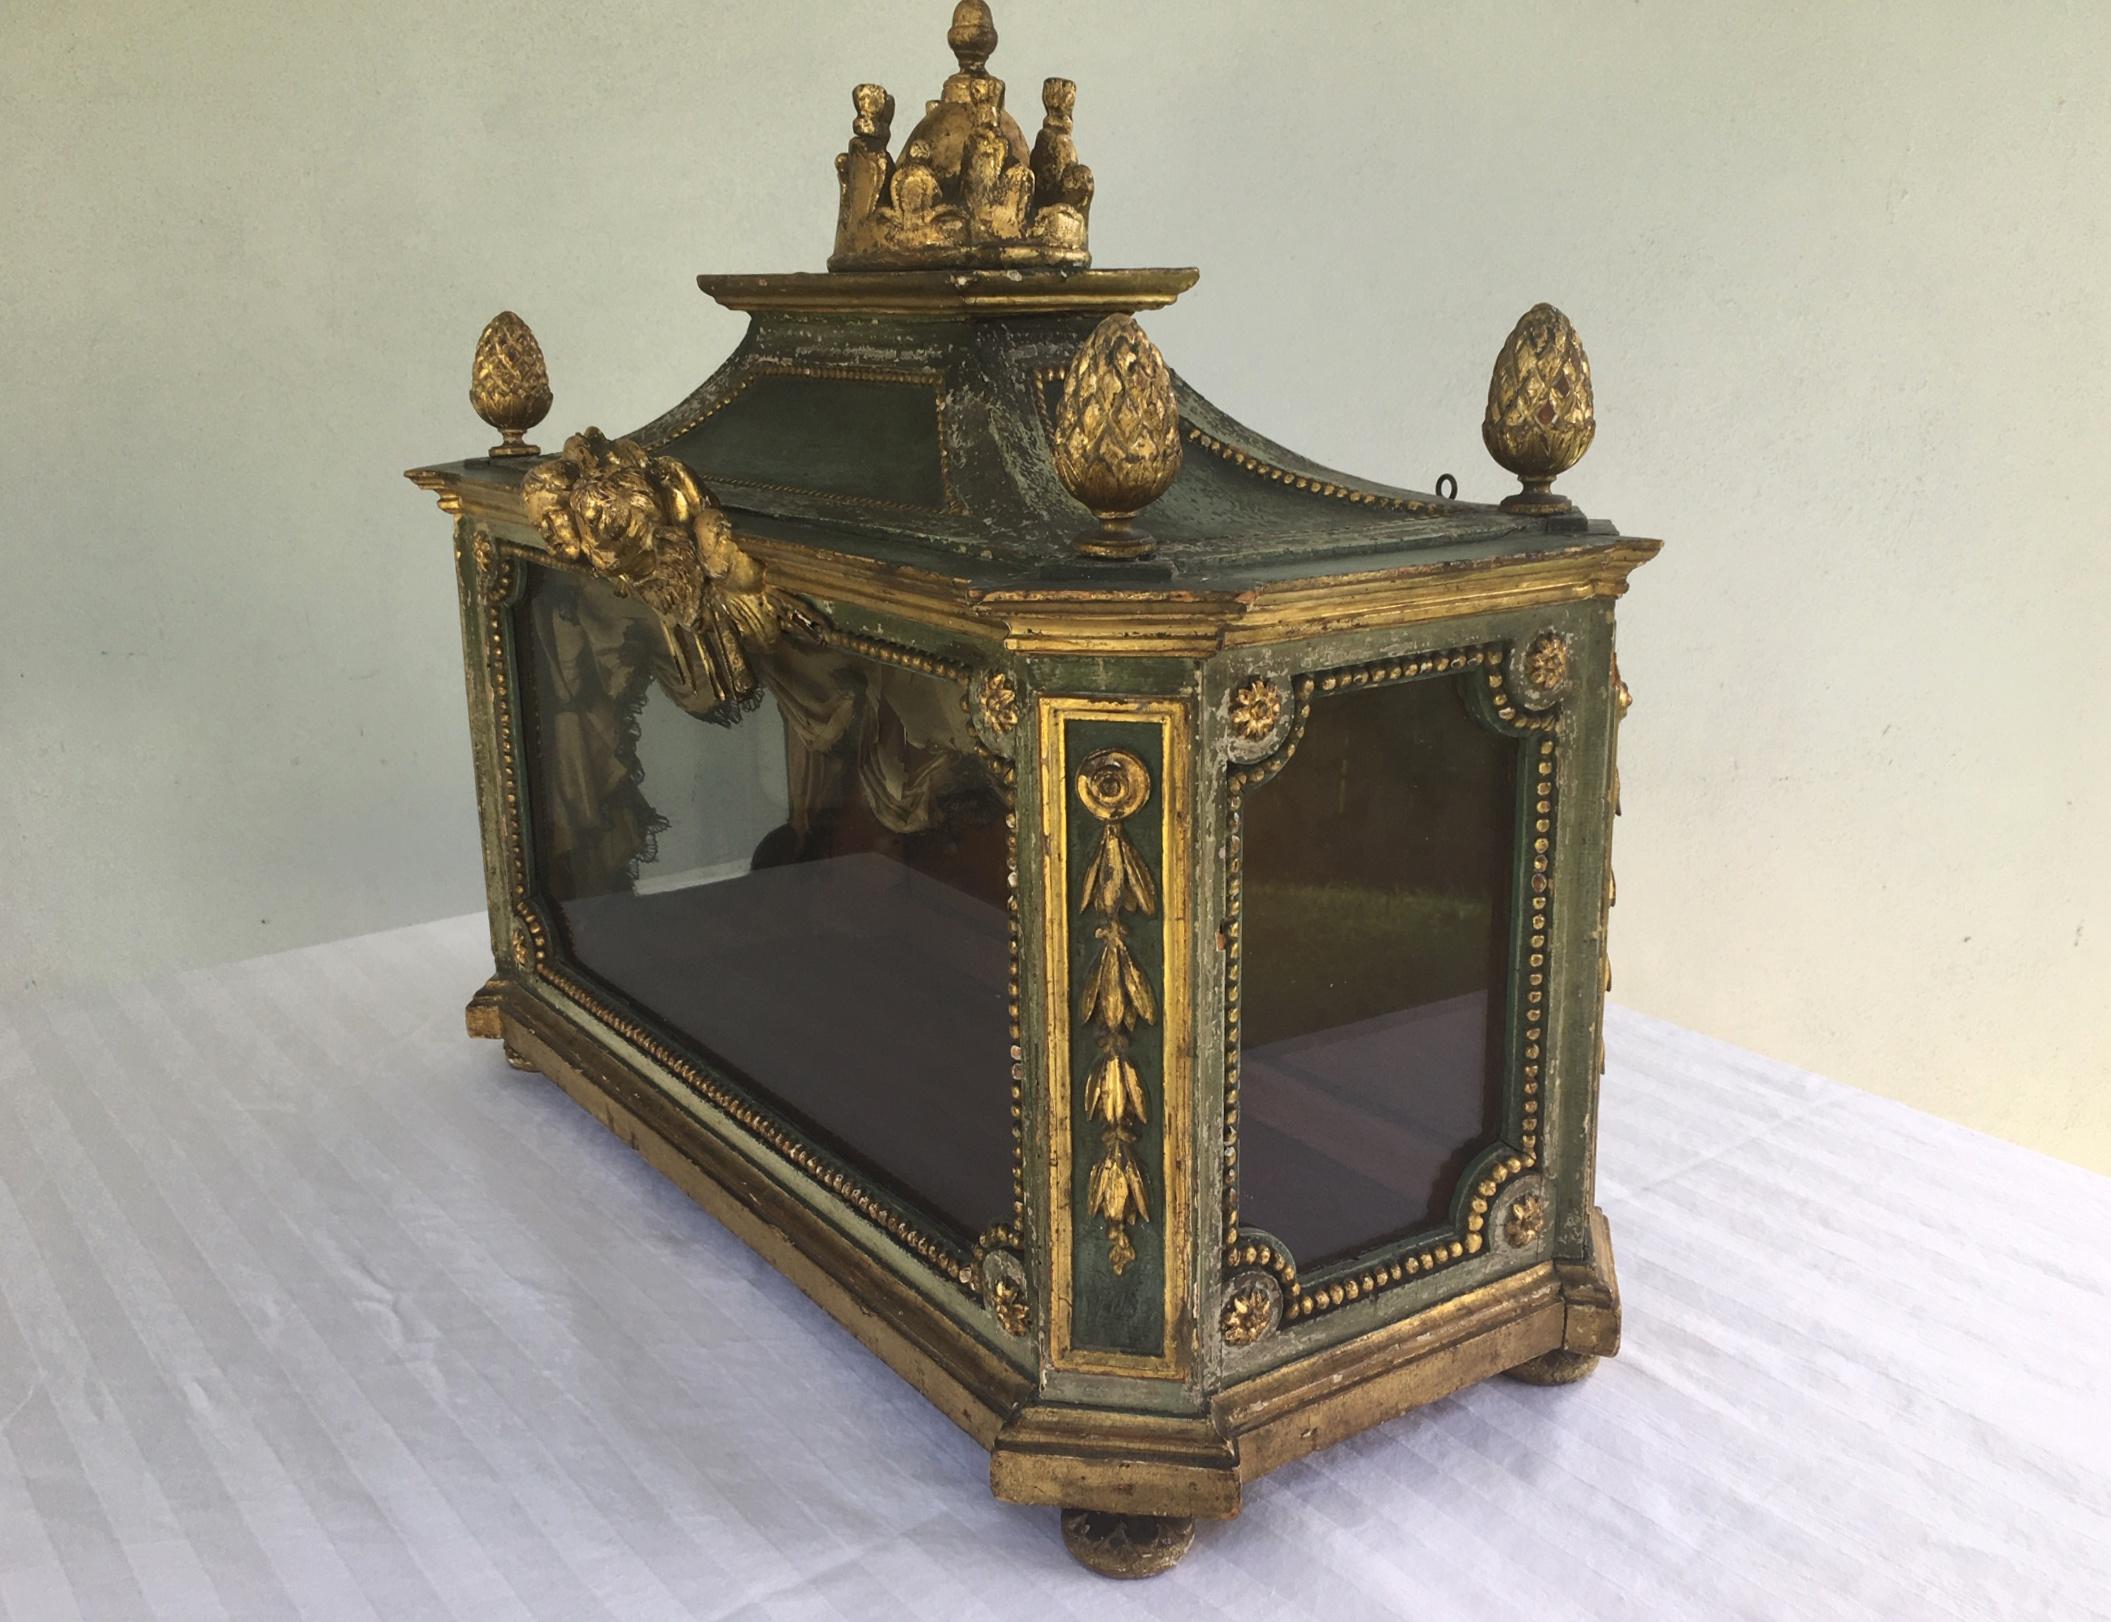 Wood Important Early 18th Century Italian Baroque Reliquary Casket